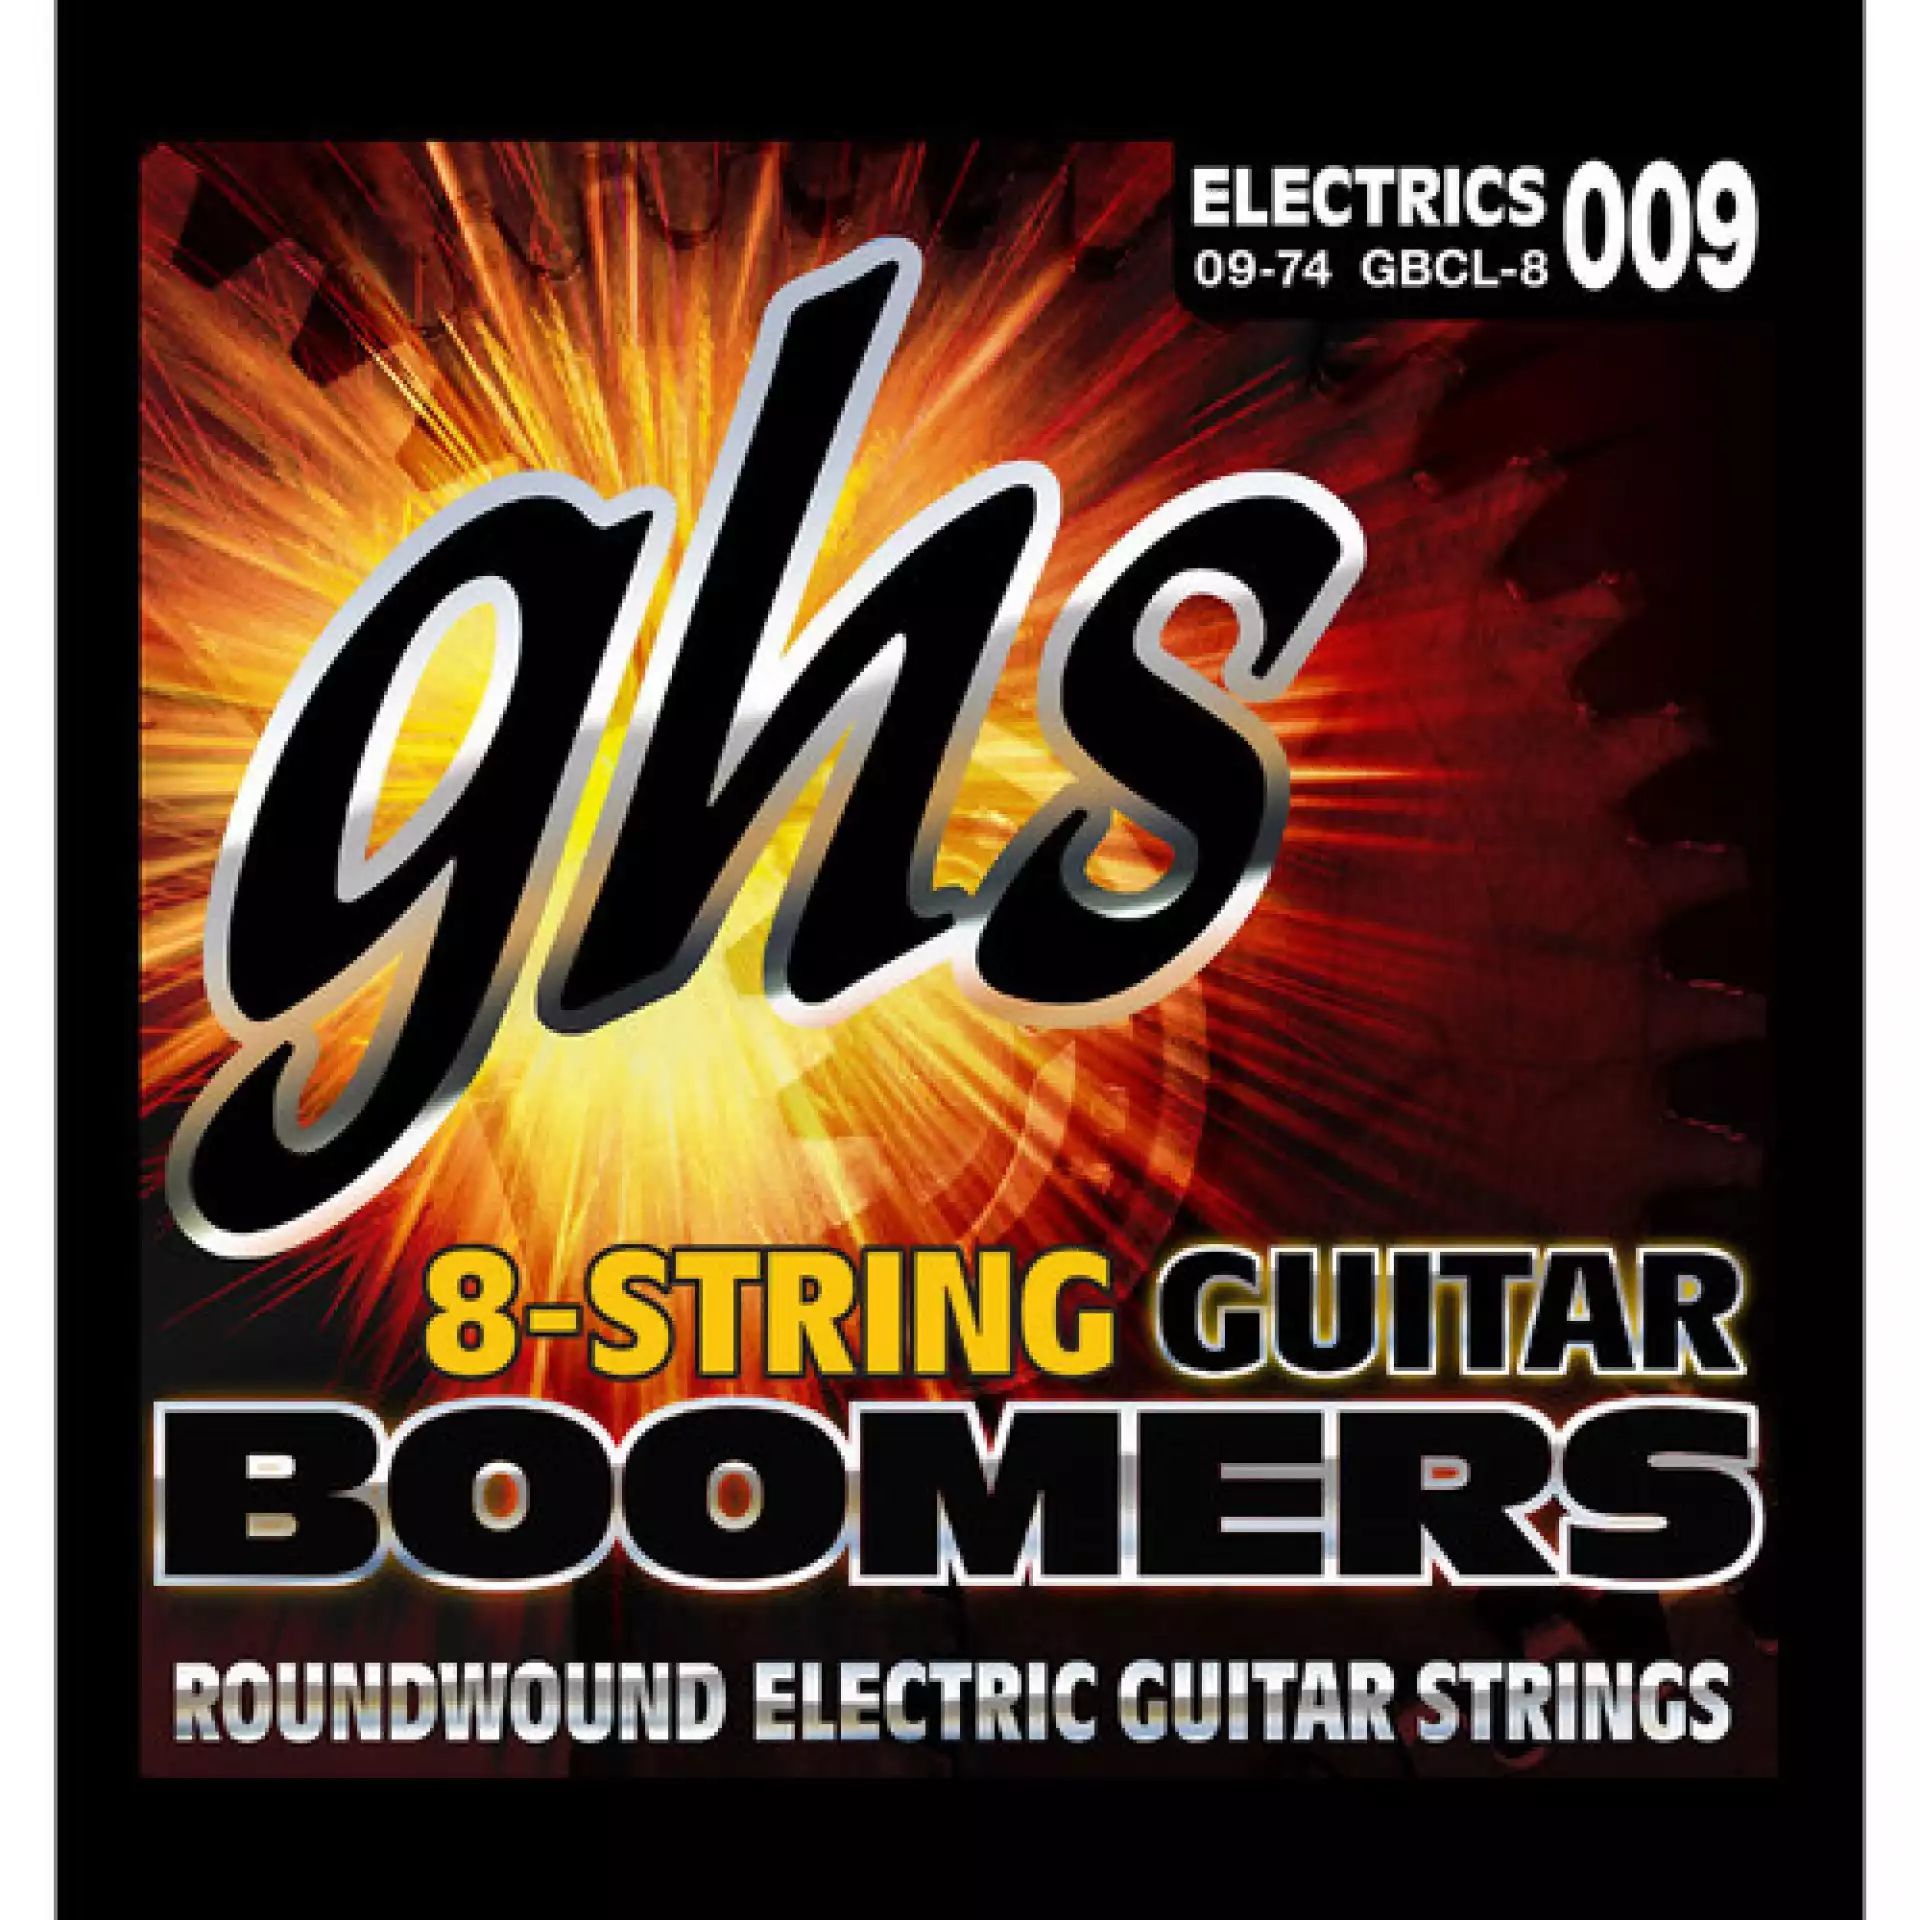 GHS GBCL-8 Boomers Custom Light Roundwound Electric Guitar Strings (8-String Set, 9 - 74)